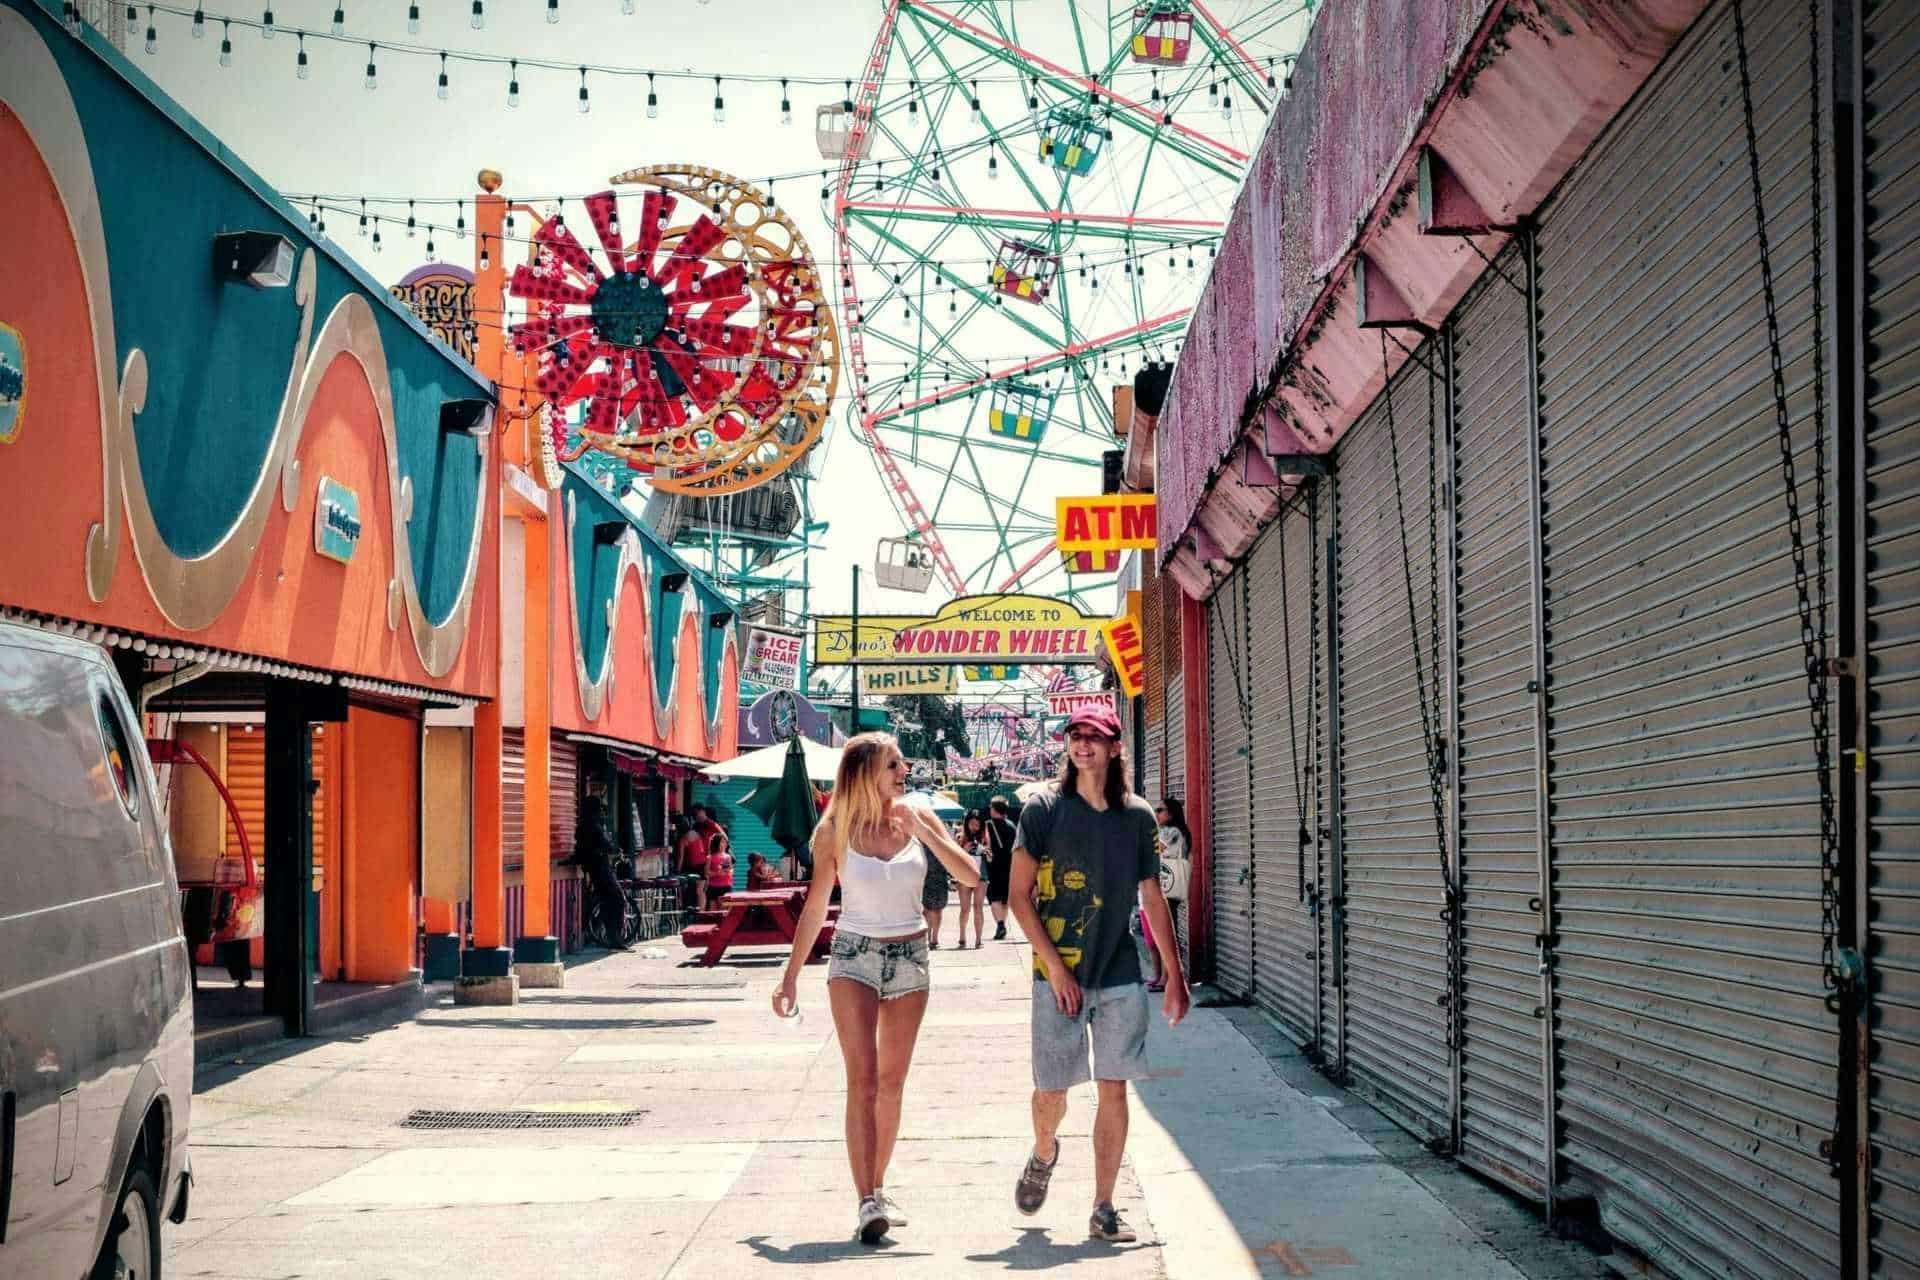 heterosexual couple walking together at a carnival.